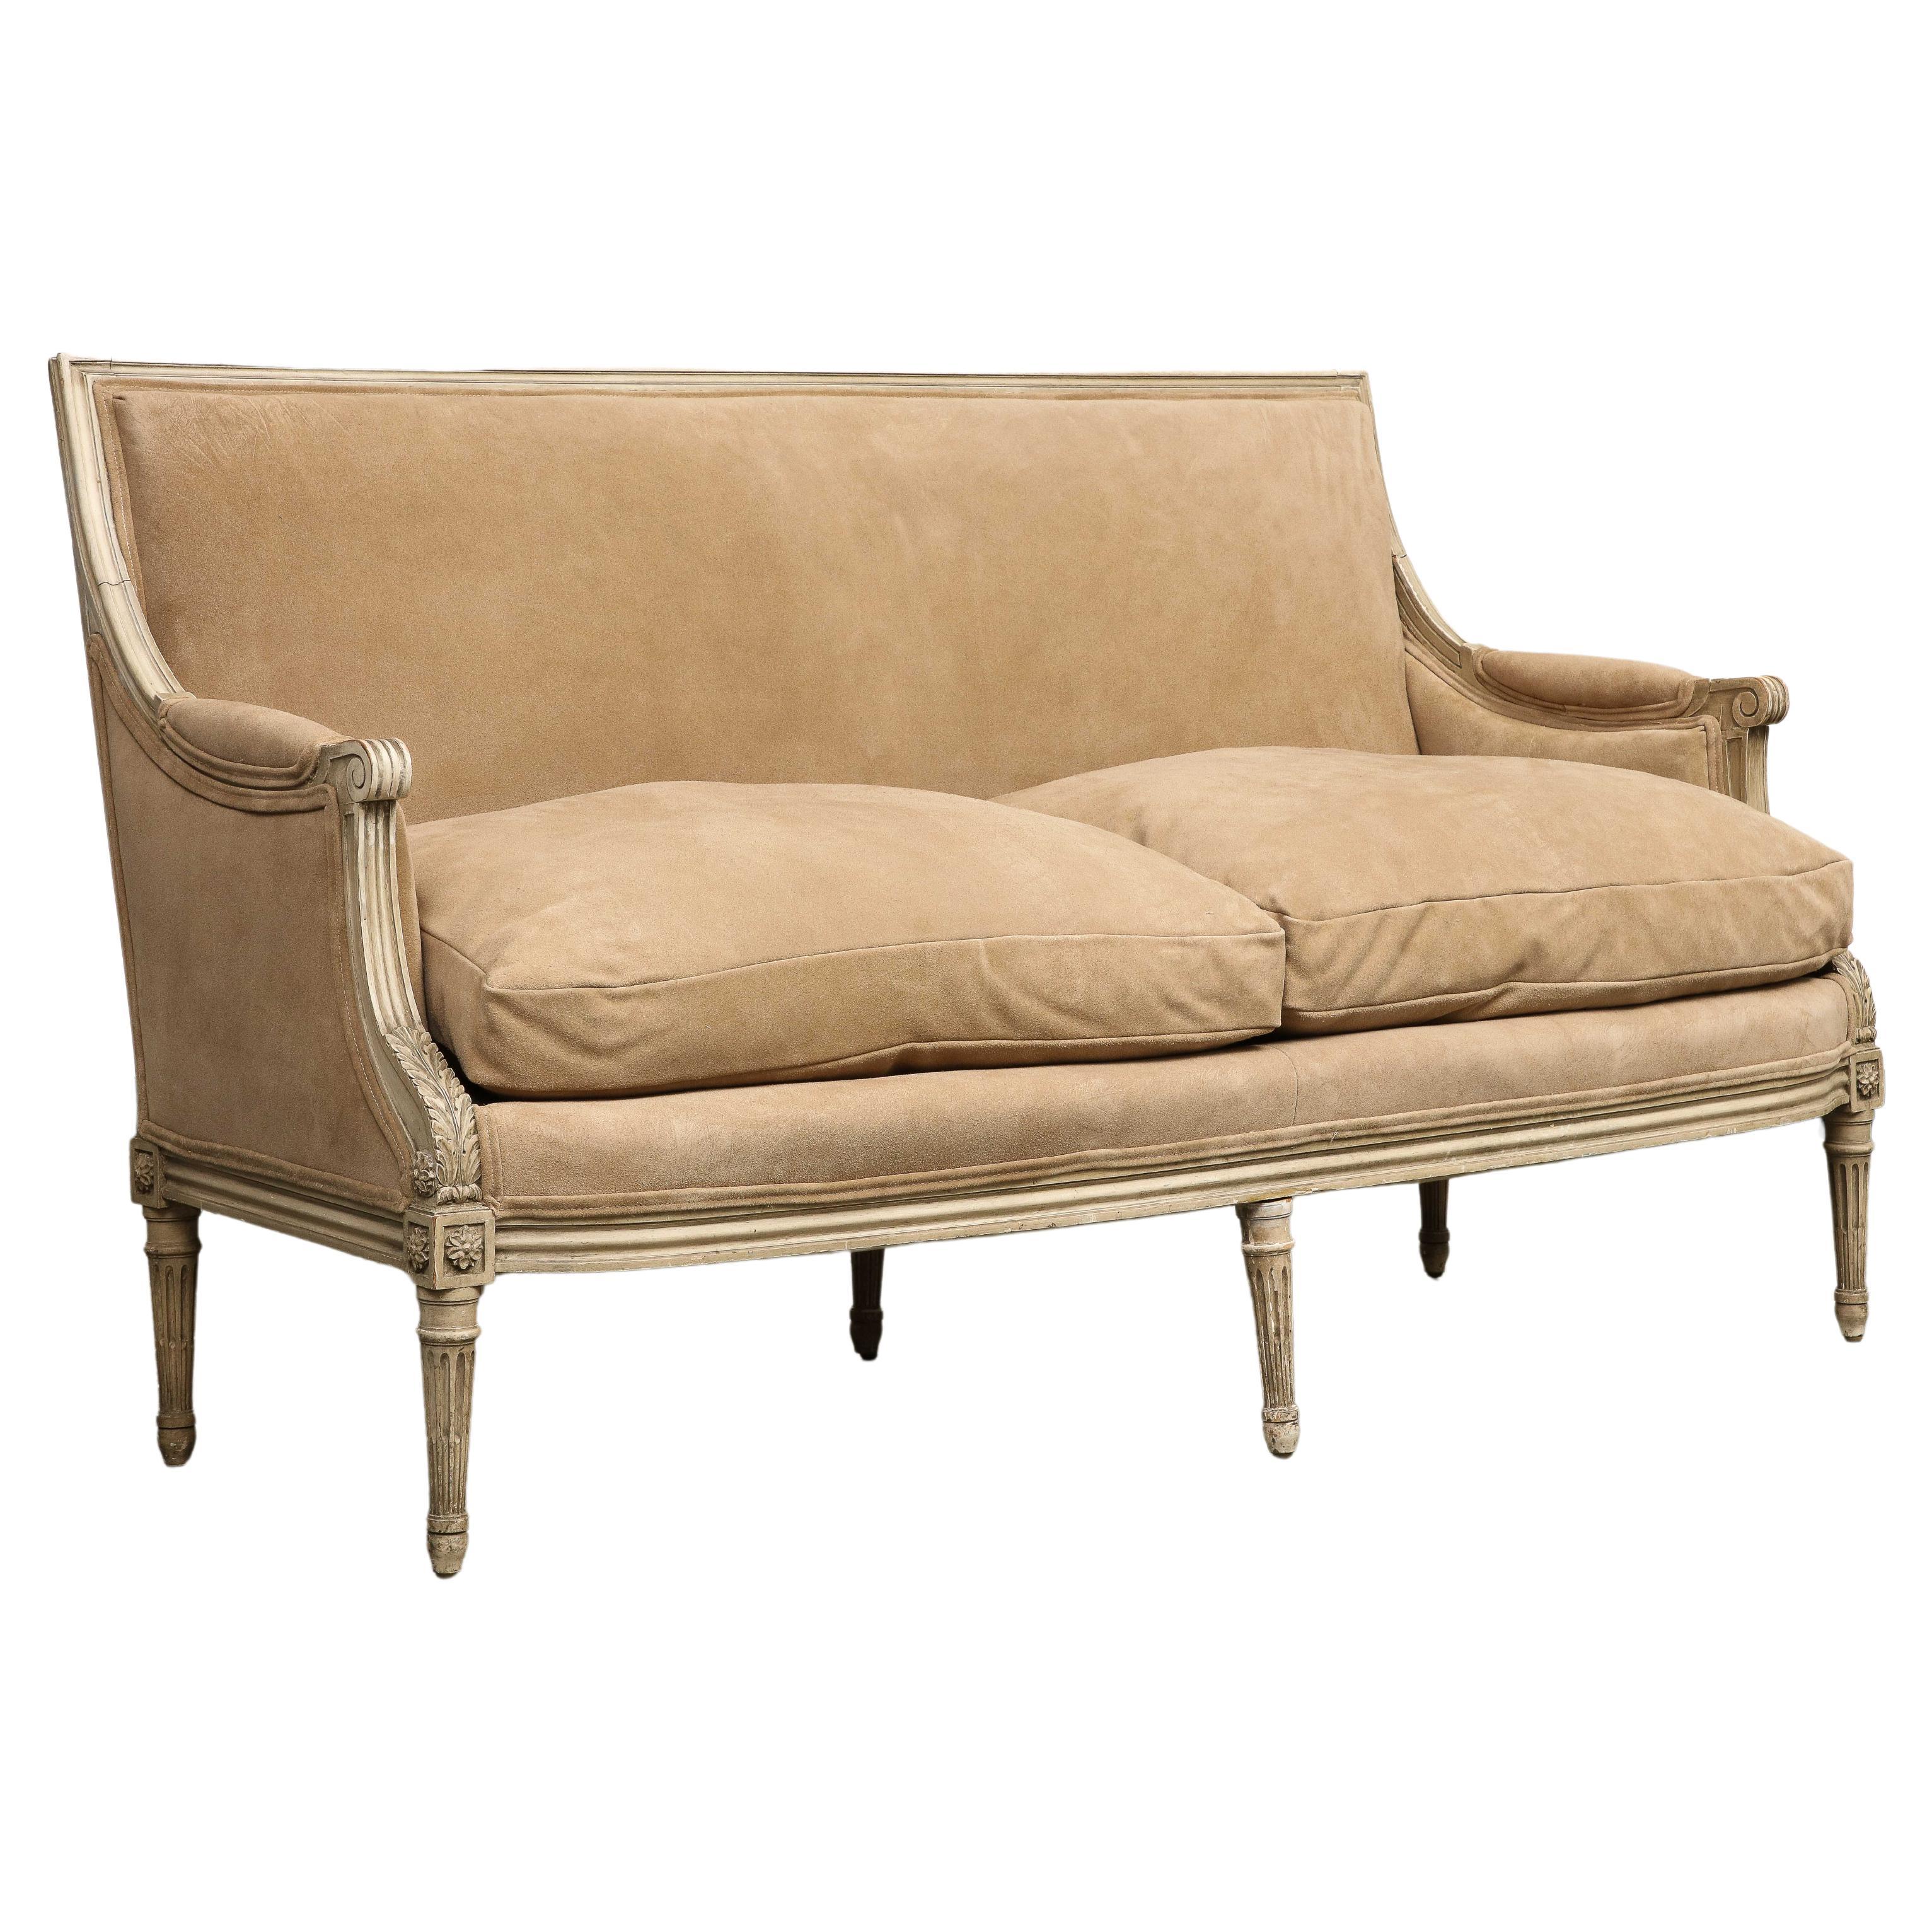 French Louis XVI Style Painted Settee with New Suede Upholstery, circa 1930